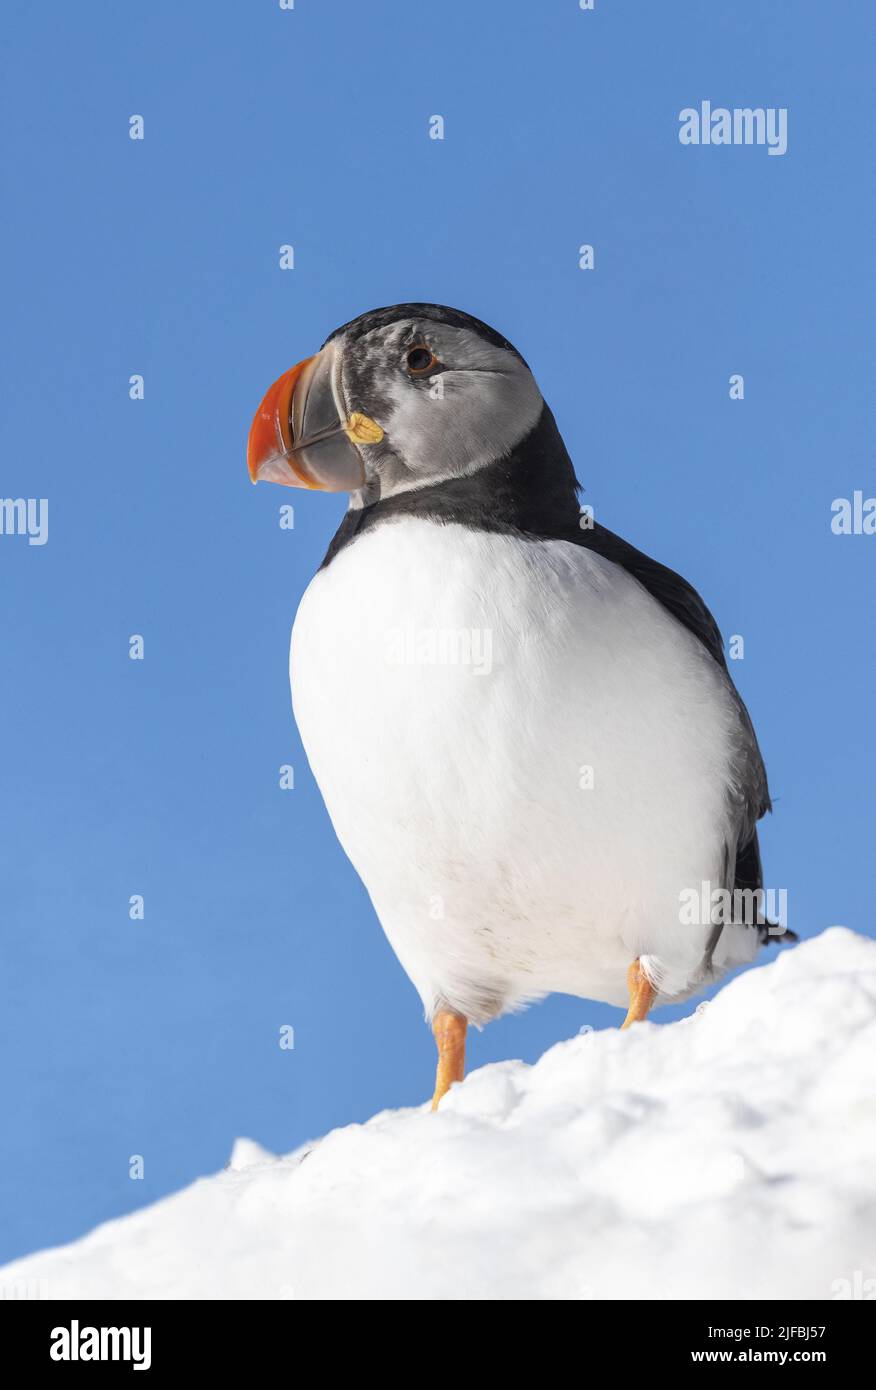 Norway, Varanger Fjord, Vardø or Vardo, Island of Hornøya, protected island with large colonies of seabirds, Atlantic Puffin (Fratercula arctica), in the snow Stock Photo